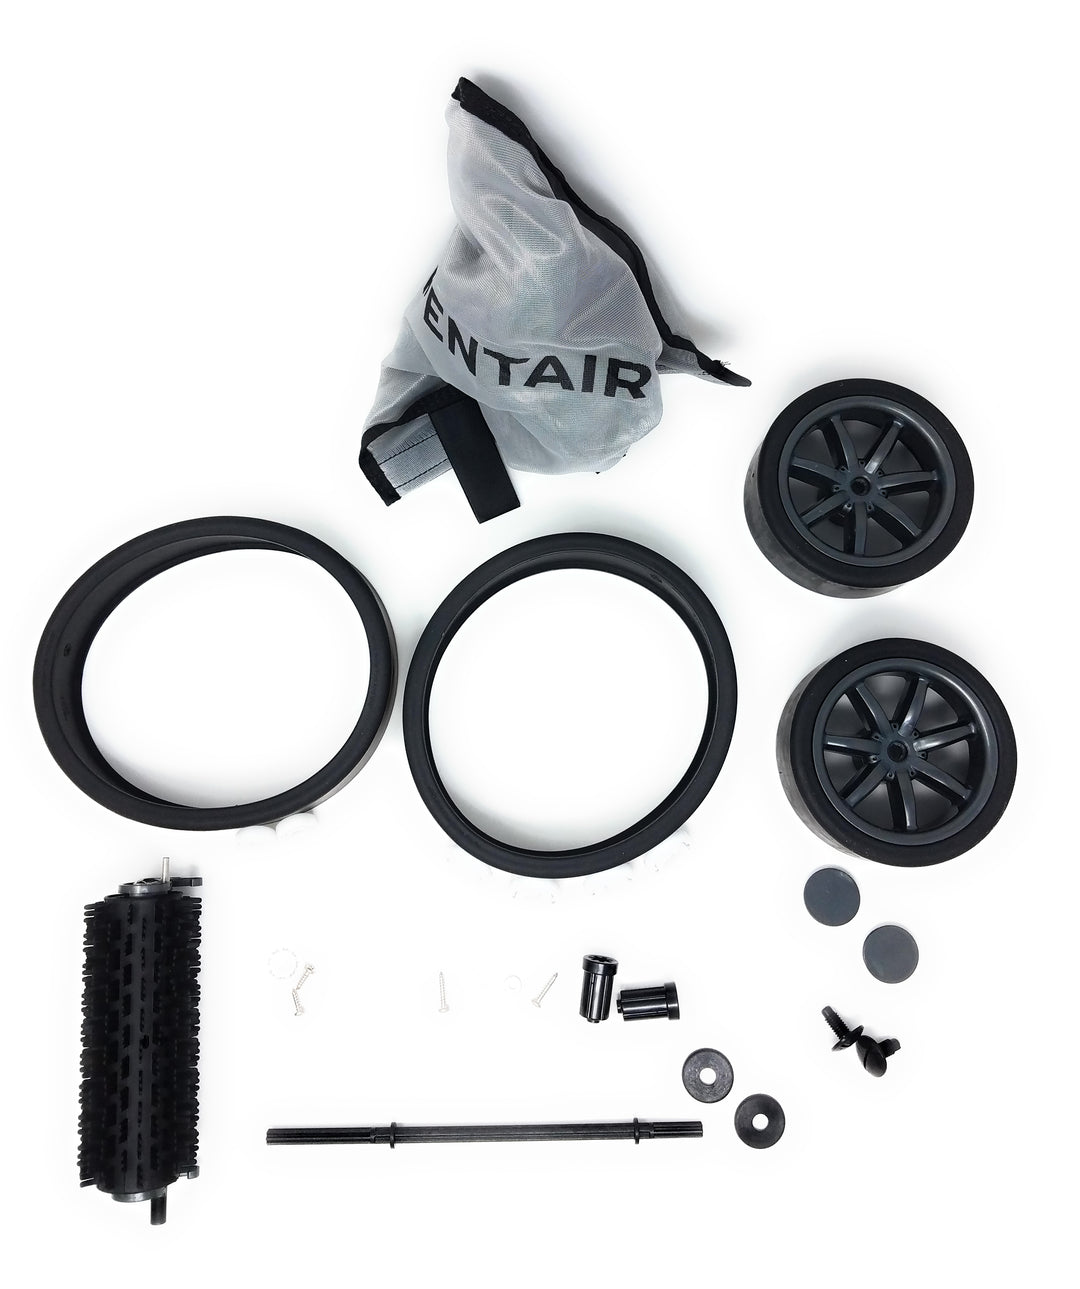 Top View of Pentair Racer Pressure Side Cleaner Racer Tune-Up Kit - ePoolSupply